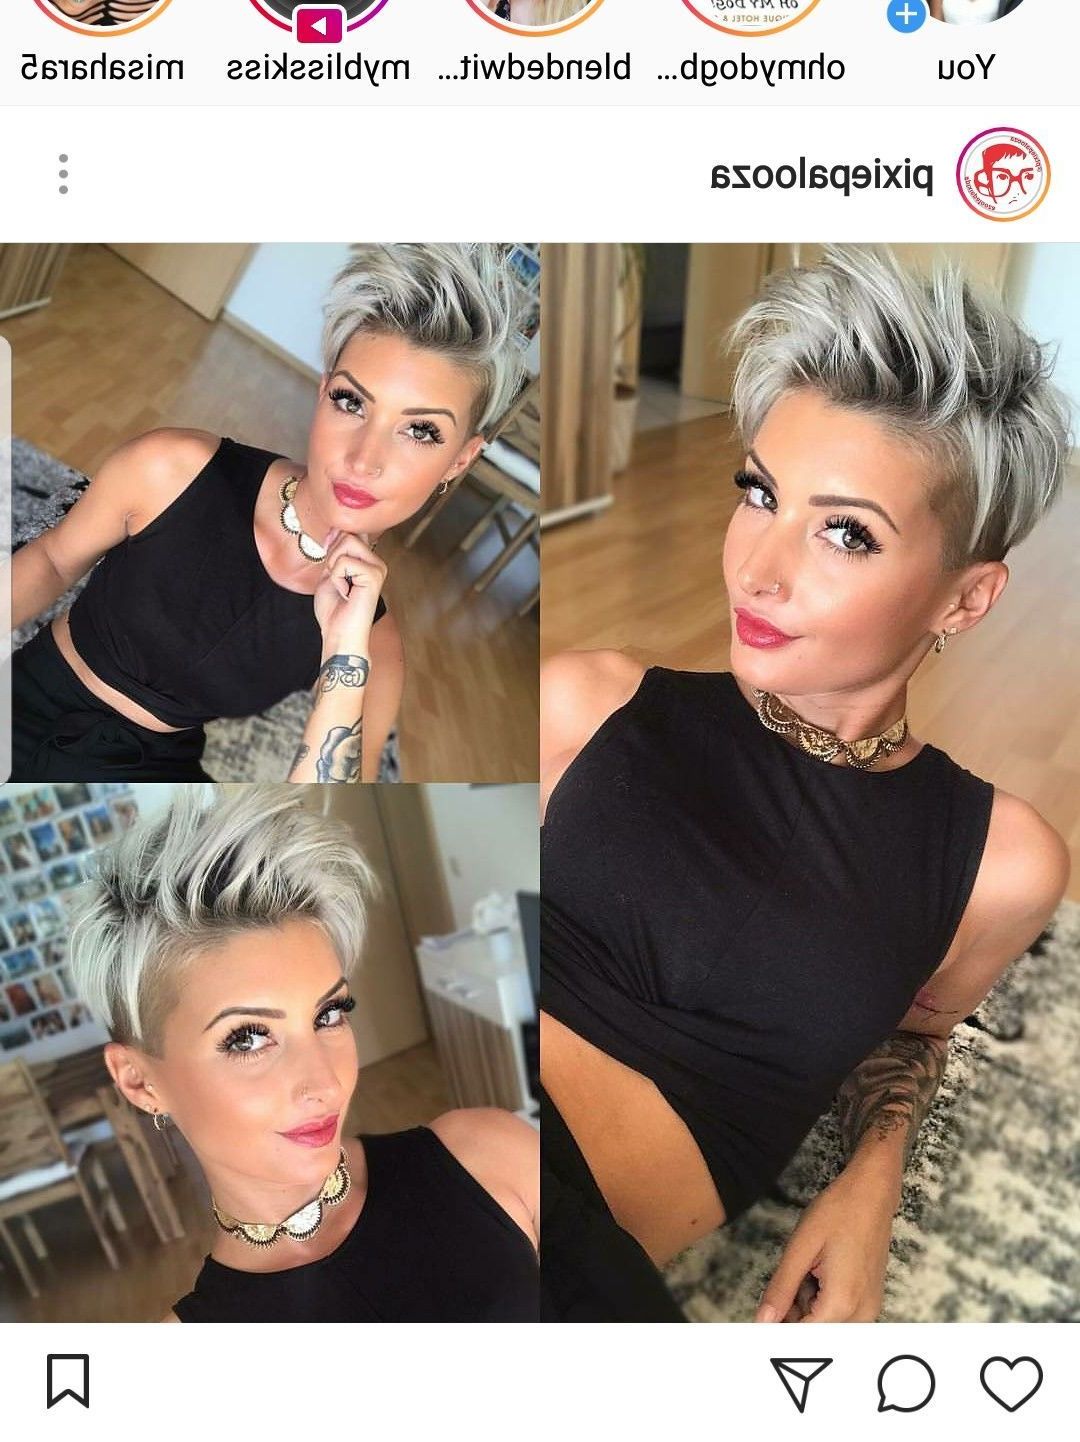 Pinadria Bedwell On Hair I Want To Try | Pinterest | Edgy Short With Regard To Sunny Blonde Finely Chopped Pixie Haircuts (View 17 of 20)